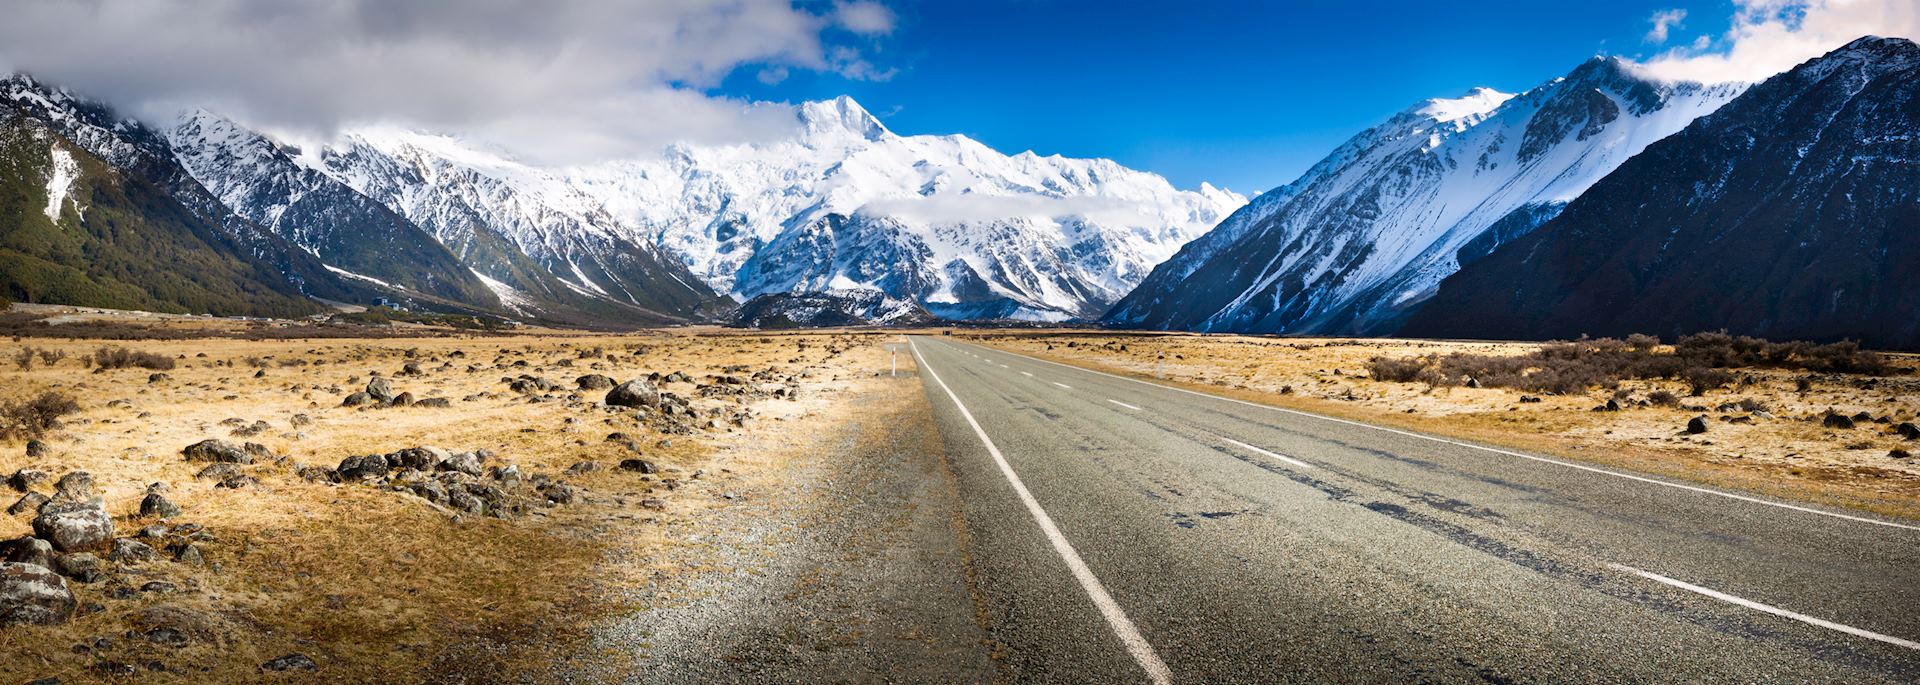 Road on New Zealand's South Island